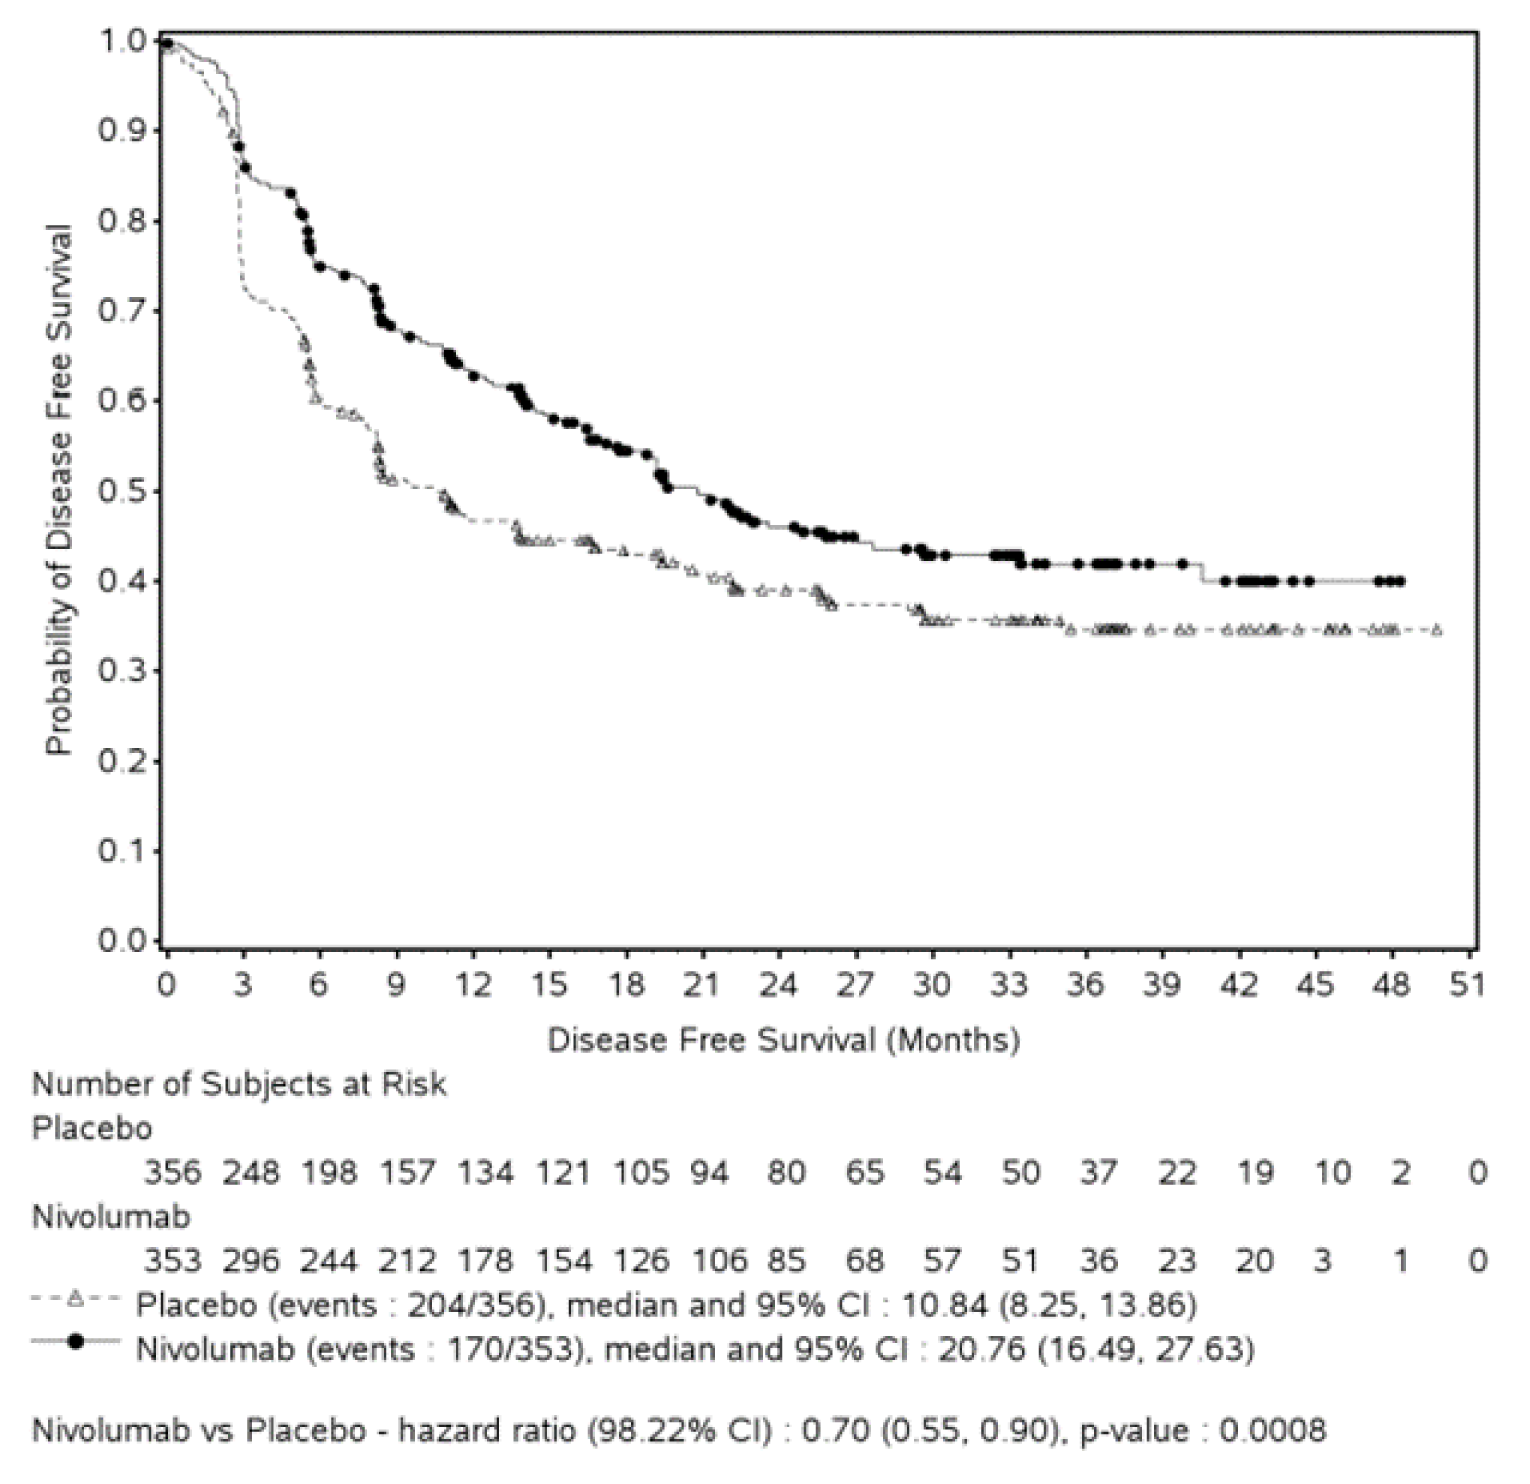 In this Kaplan-Meier analysis of DFS (primary definition) among patients in the CheckMate 274 trial, the curves representing patients who received nivolumab and placebo follow a similar downwards slope, with the placebo curve falling below the nivolumab curve. The curves end at 50 months with survival of almost 40% of patients receiving nivolumab and 35% of patients receiving placebo. Median DFS was 20.8 months (95% CI, 17.1 to 27.6) among patients receiving nivolumab and 10.8 (95% CI, 8.3 to 13.9) among patients receiving placebo (HR = 0.7; 99.8% CI, 0.6, 0.9; P = 0.0006). The number of at-risk patients receiving nivolumab at 0, 3, 6, 9, 12, 15, 18, 21, 24, 27, 30, 33, 36, 39, 42, 45, 48, and 51 months was 353, 296, 244, 212, 178, 154, 126, 106, 85, 68, 57, 51, 36, 23, 20, 3, 1, and 0 respectively. The number of at-risk patients receiving placebo at 0, 3, 6, 9, 12, 15, 18, 21, 24, 27, 30, 33, 36, 39, 42, 45, 48, and 51 was 356, 248, 198, 157, 134, 121, 105, 94, 80, 65, 54, 50, 37, 22, 19, 10, 2, and 0, respectively.